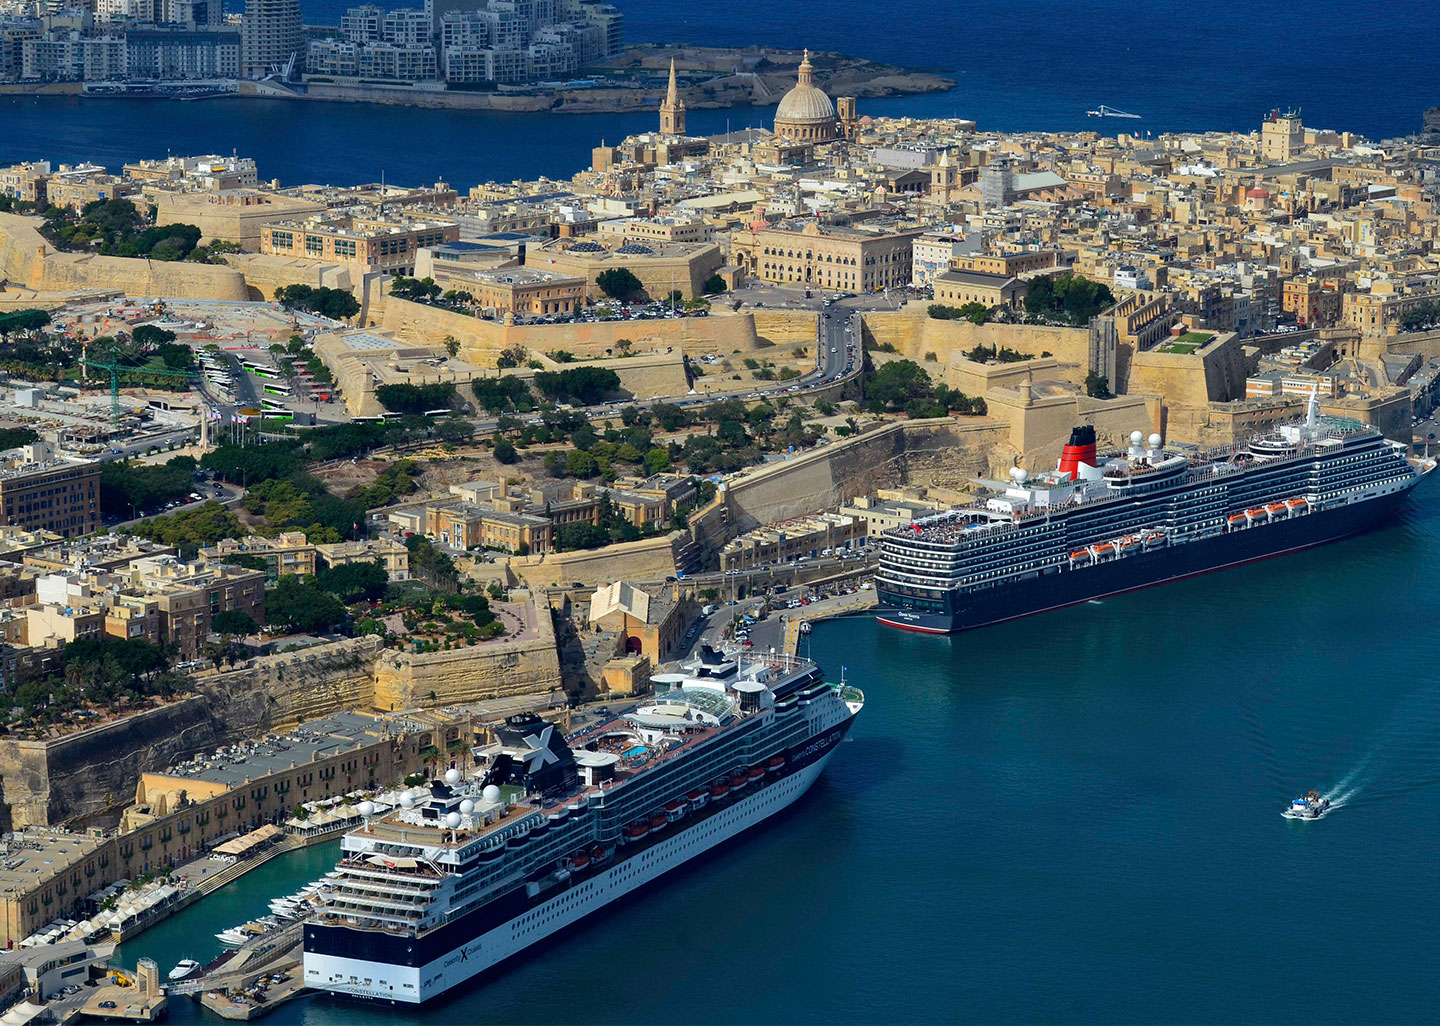 Guest experience is key to success in cruise industry - Valletta Cruise Port CEO